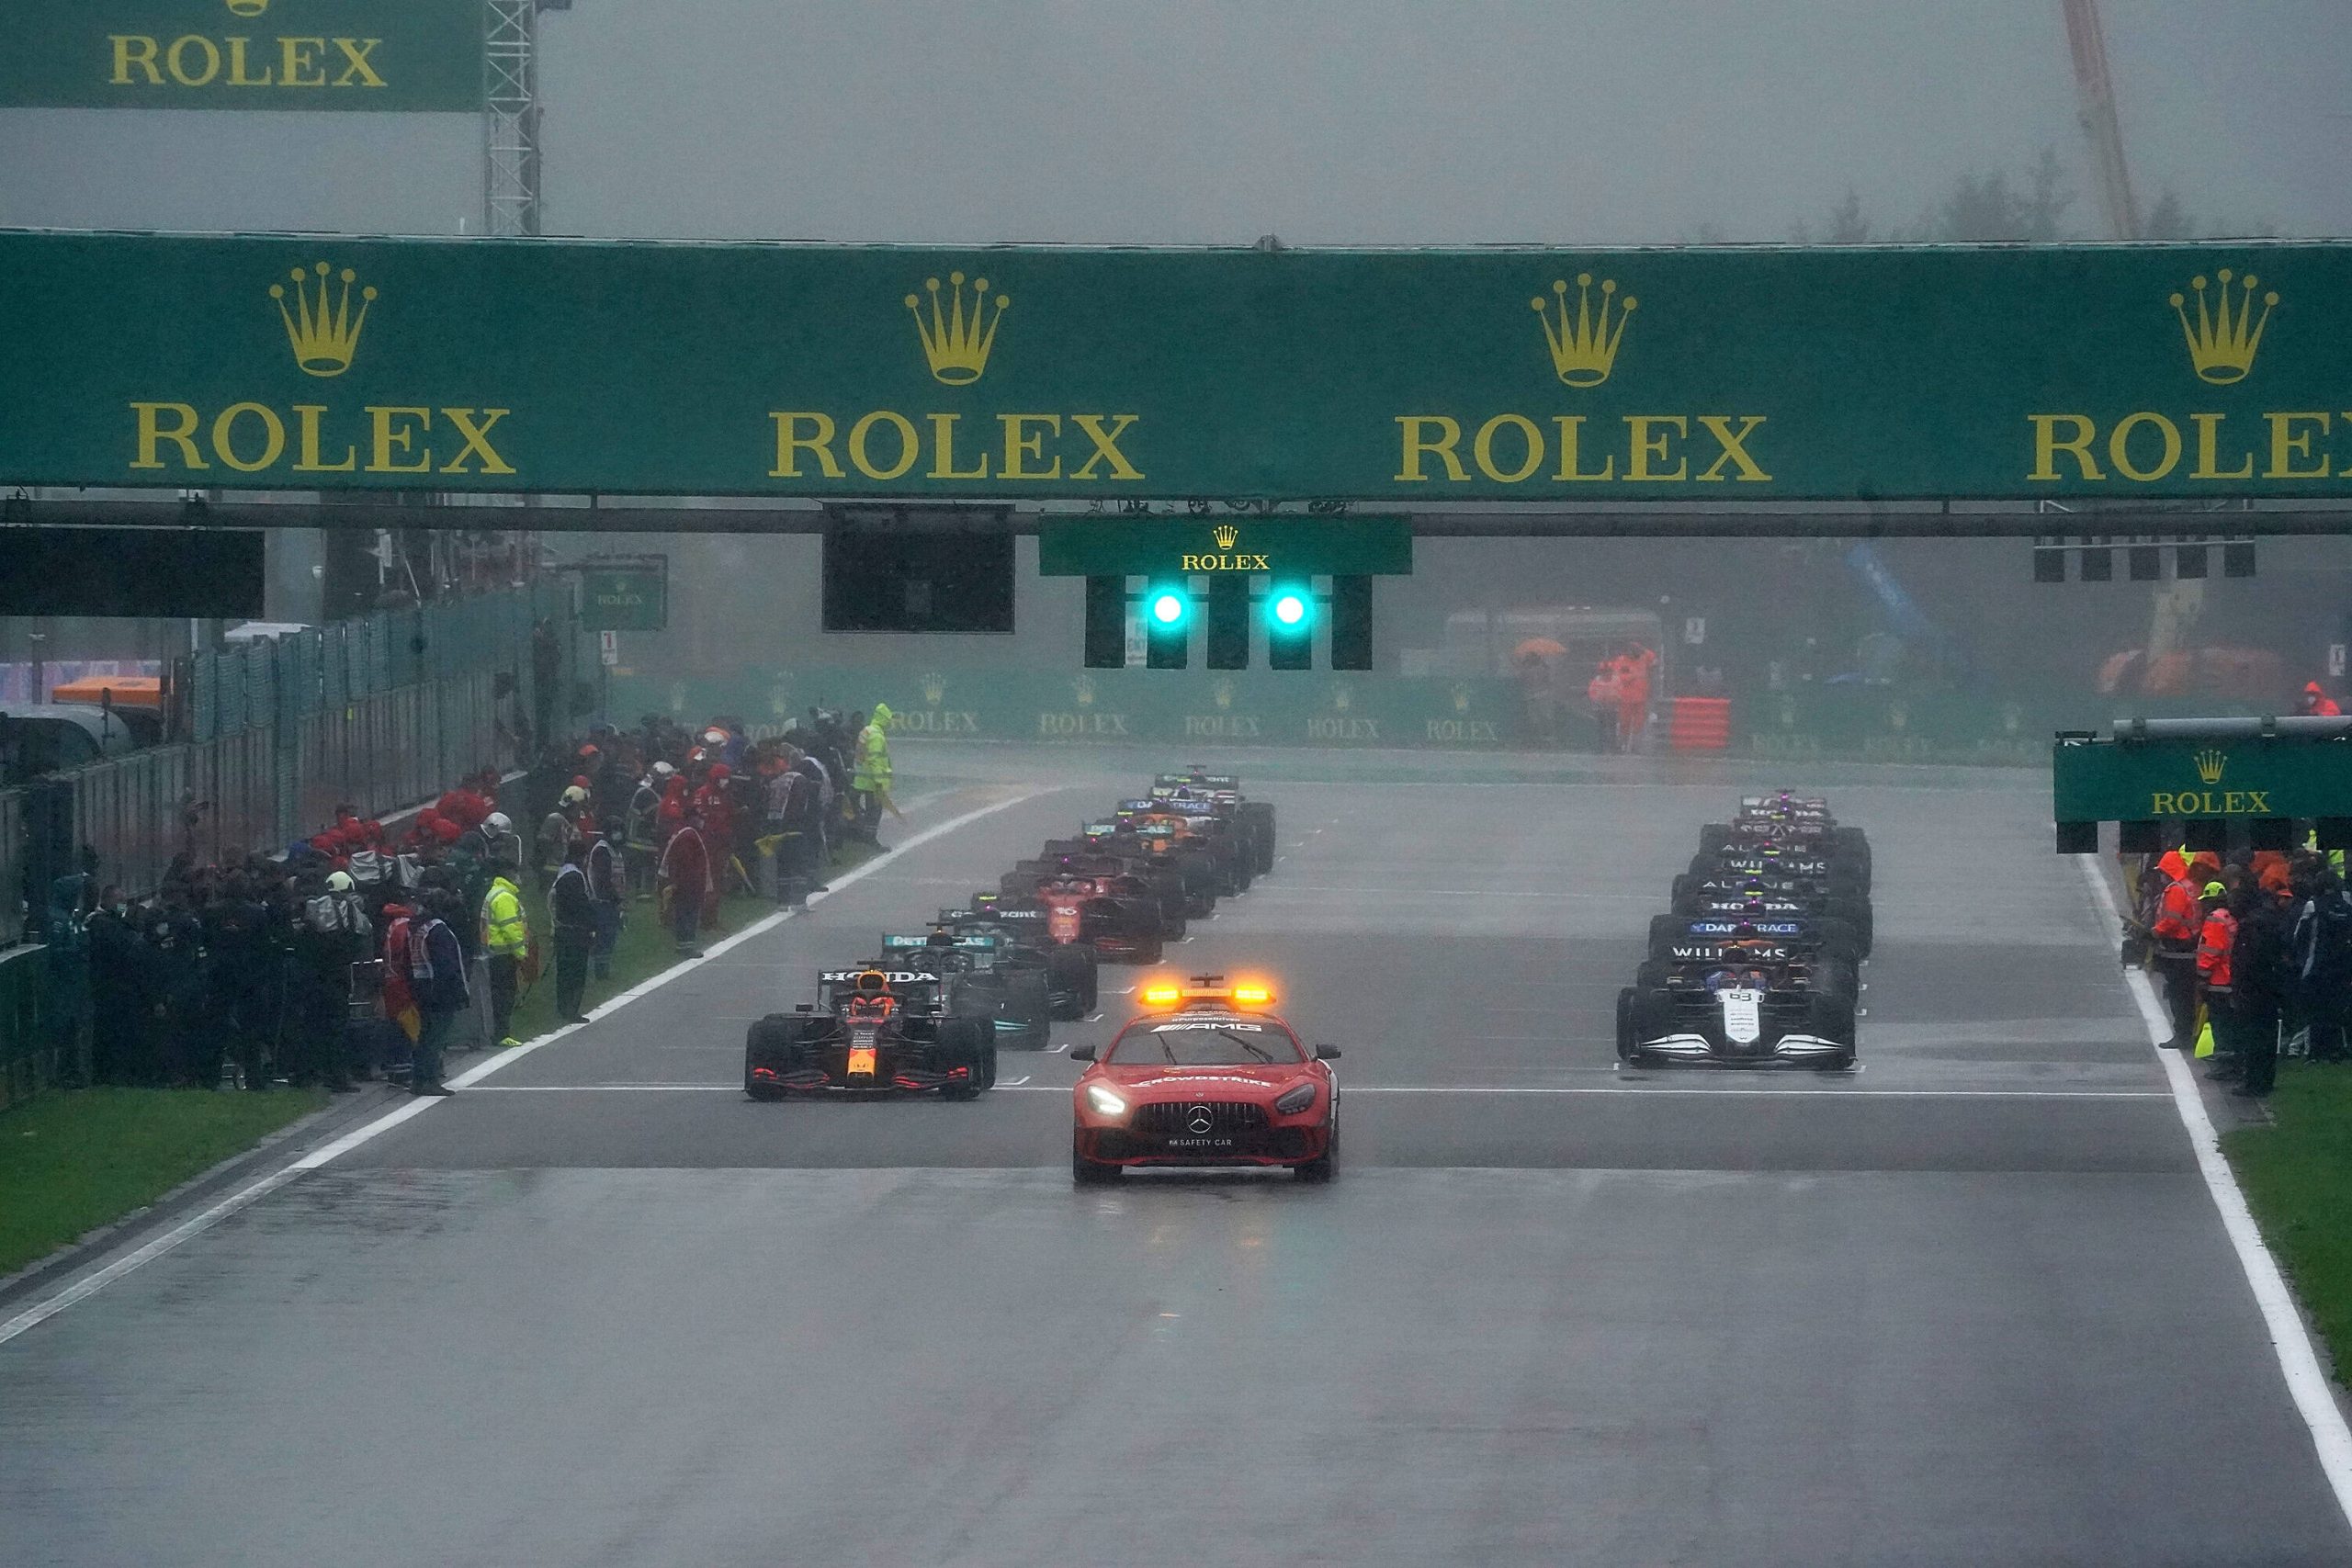 Formula one: Cars line up on the grid waiting to start behind the safety car